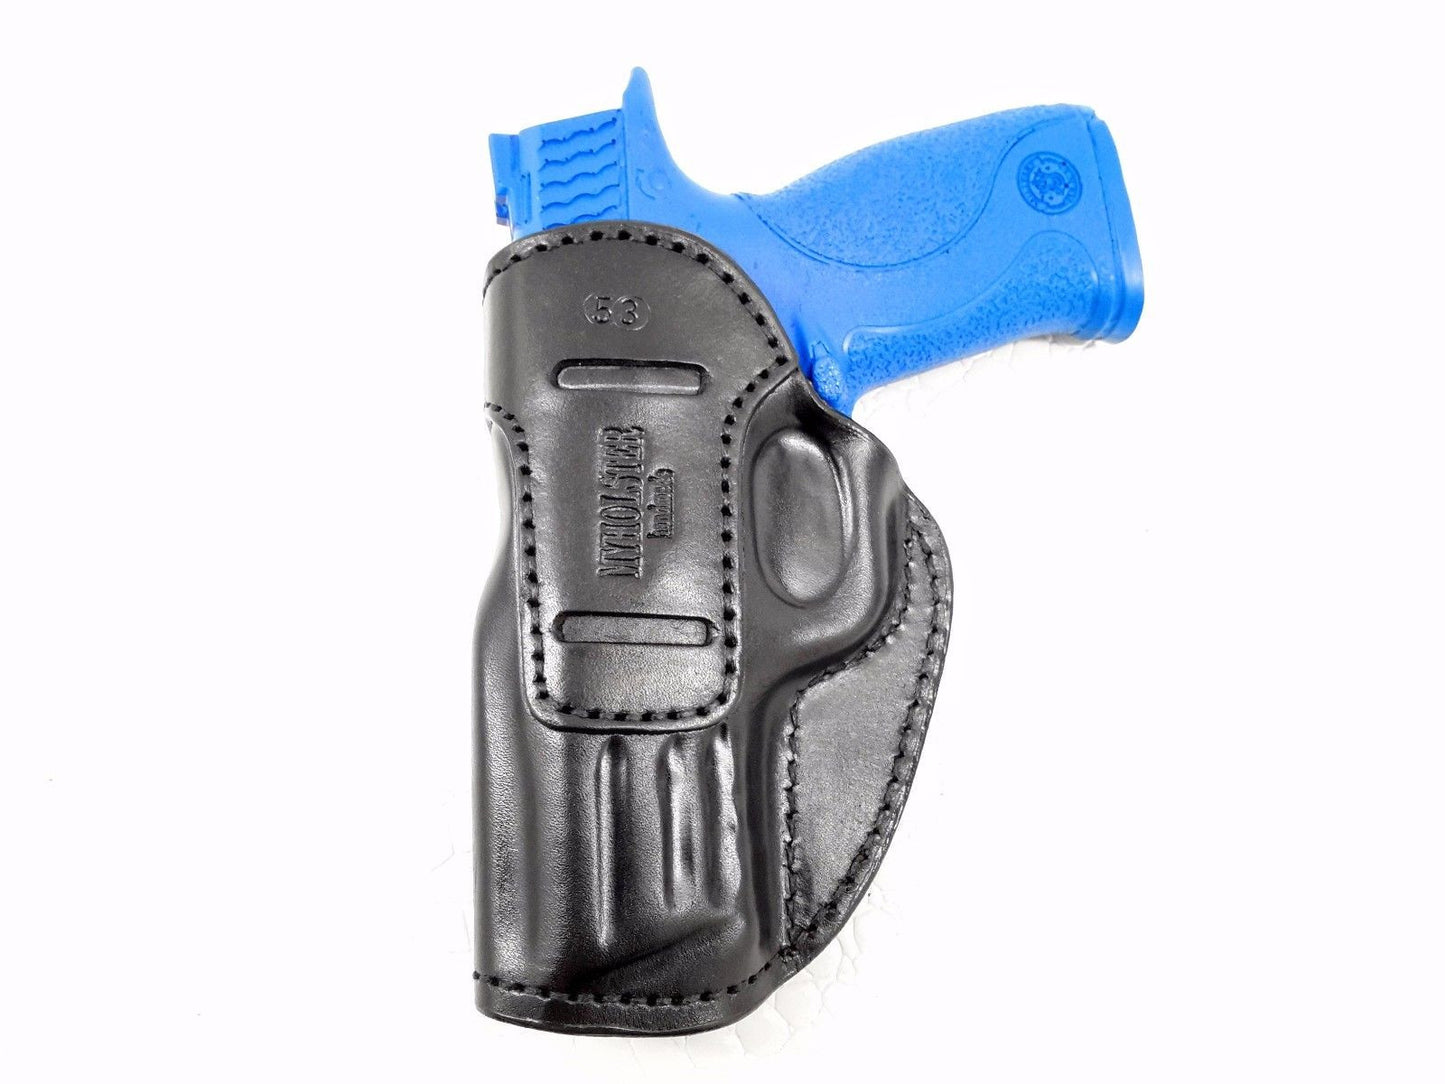 IWB Inside the Waistband holster for Smith & Wesson M&P Pro 40 w/ 4.25" Barrel